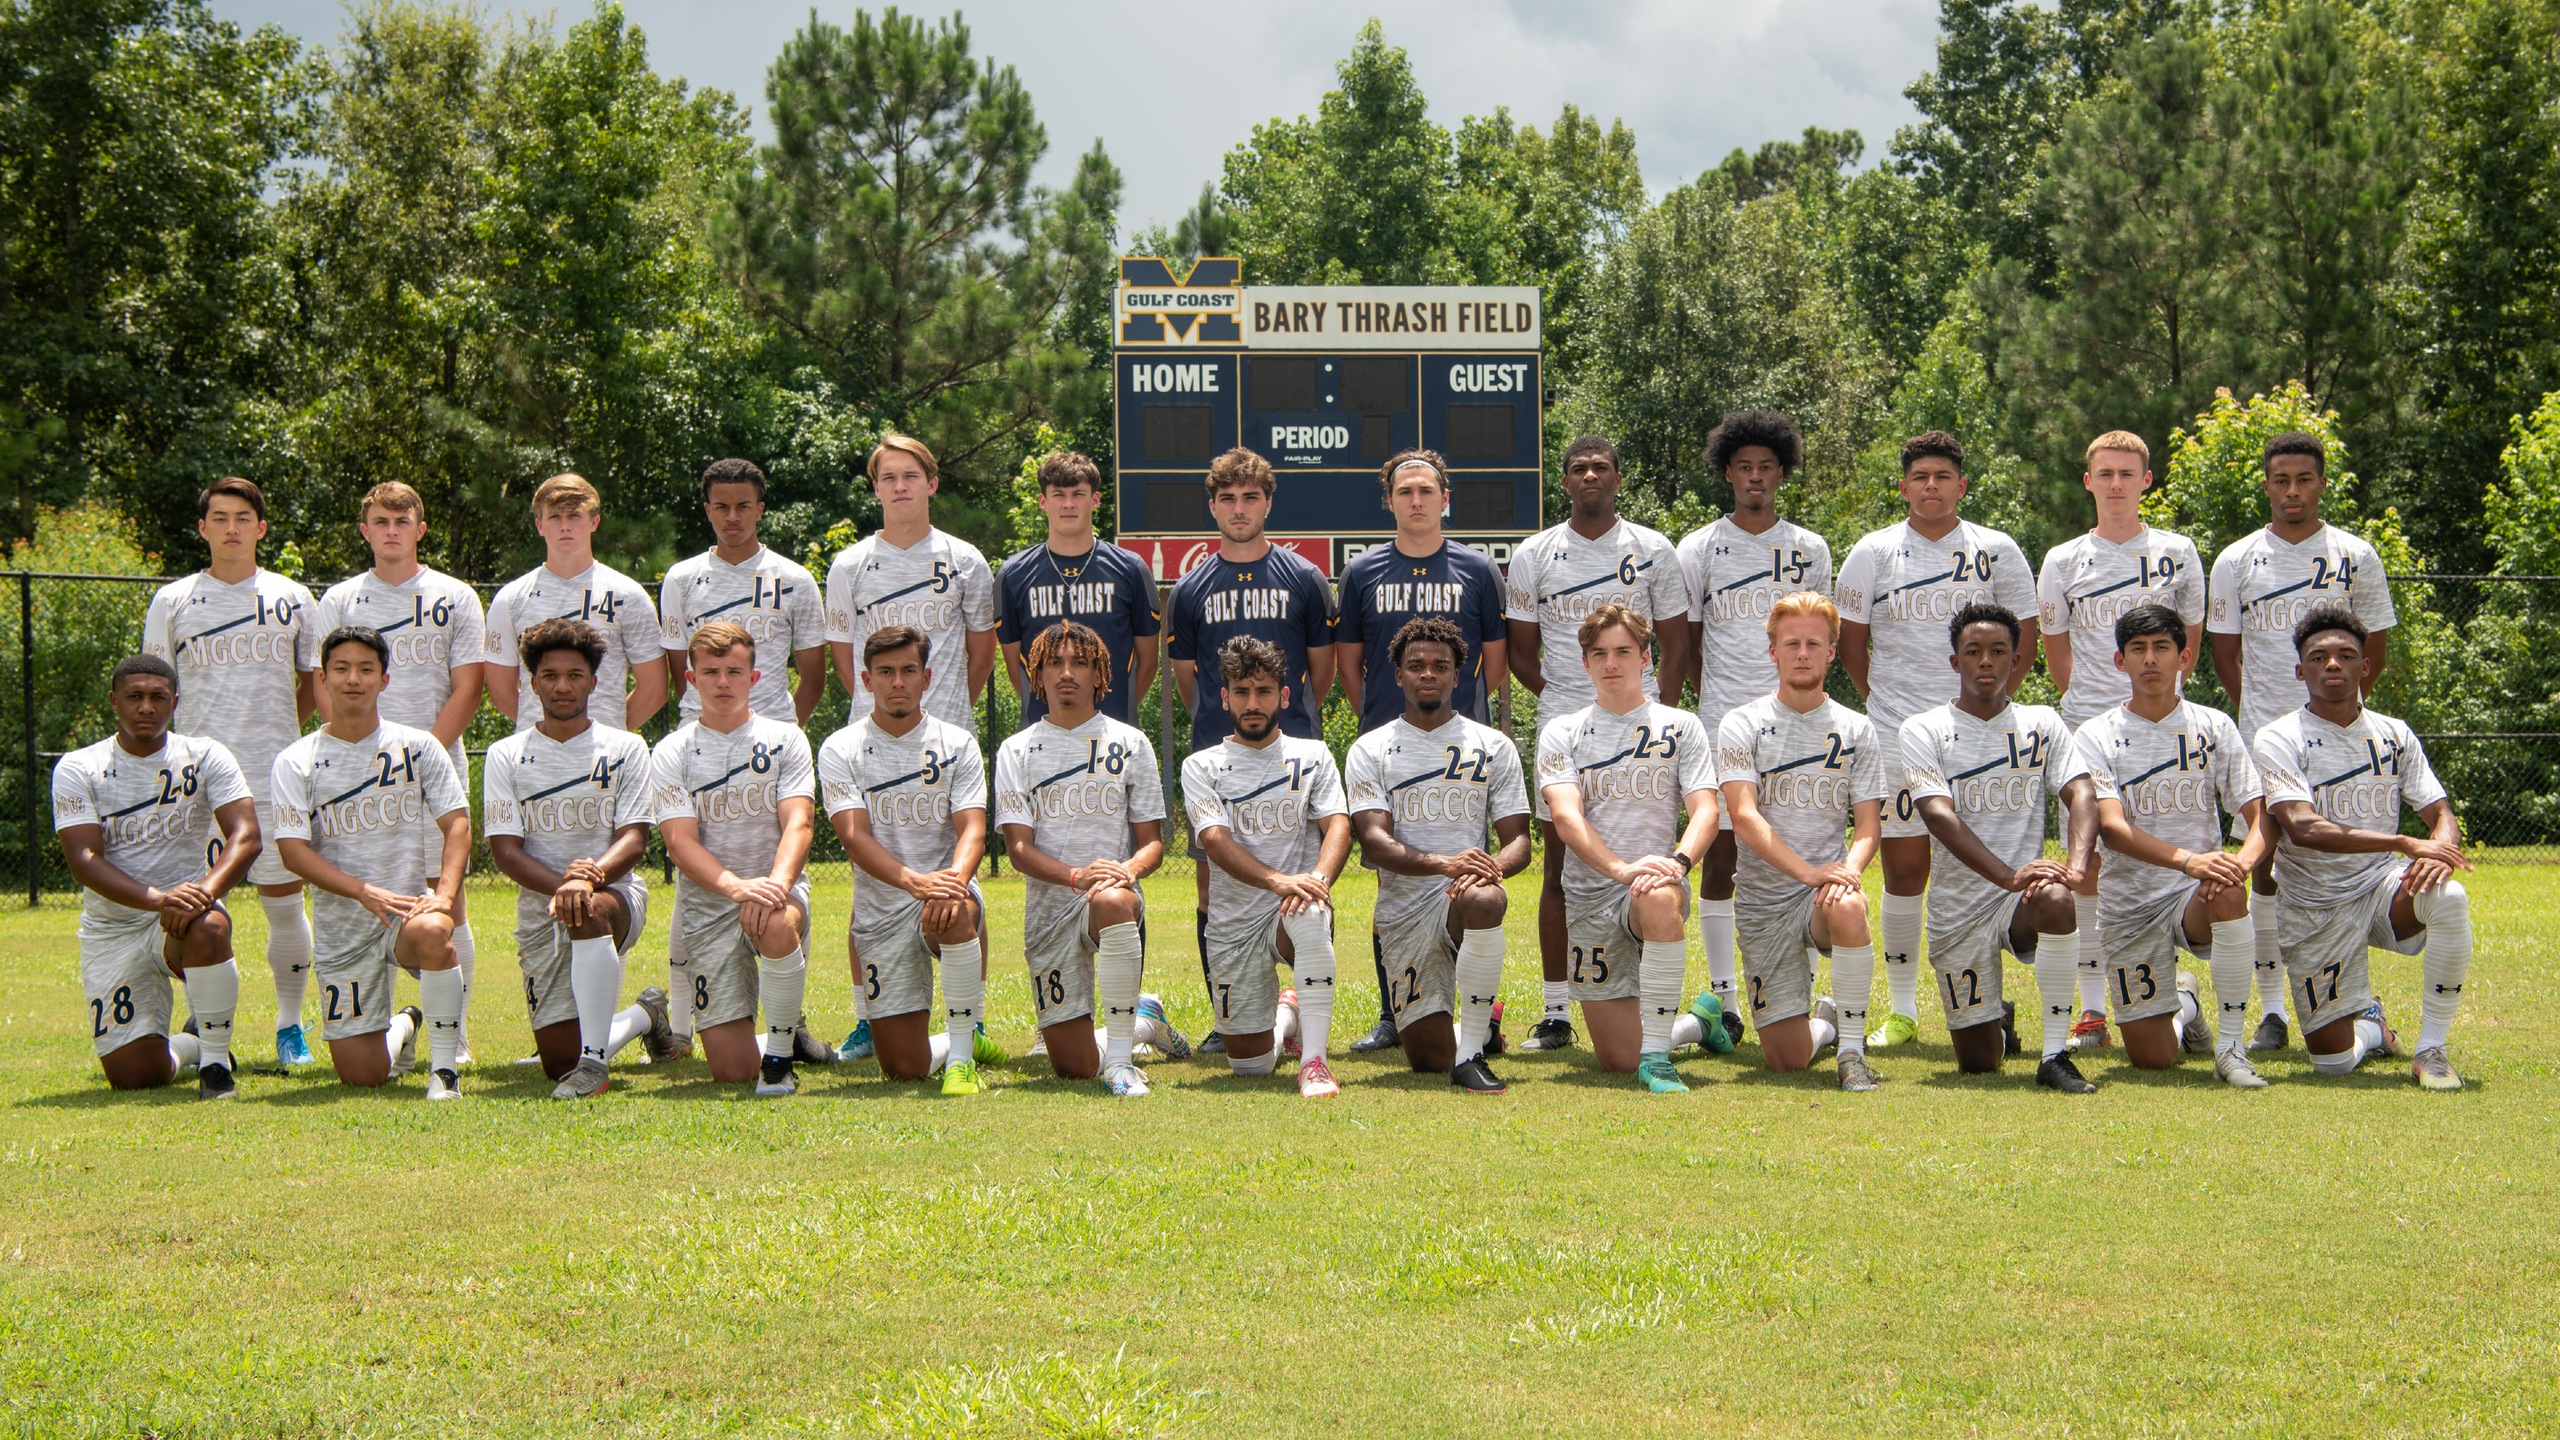 No. 13 MGCCC will host playoff game